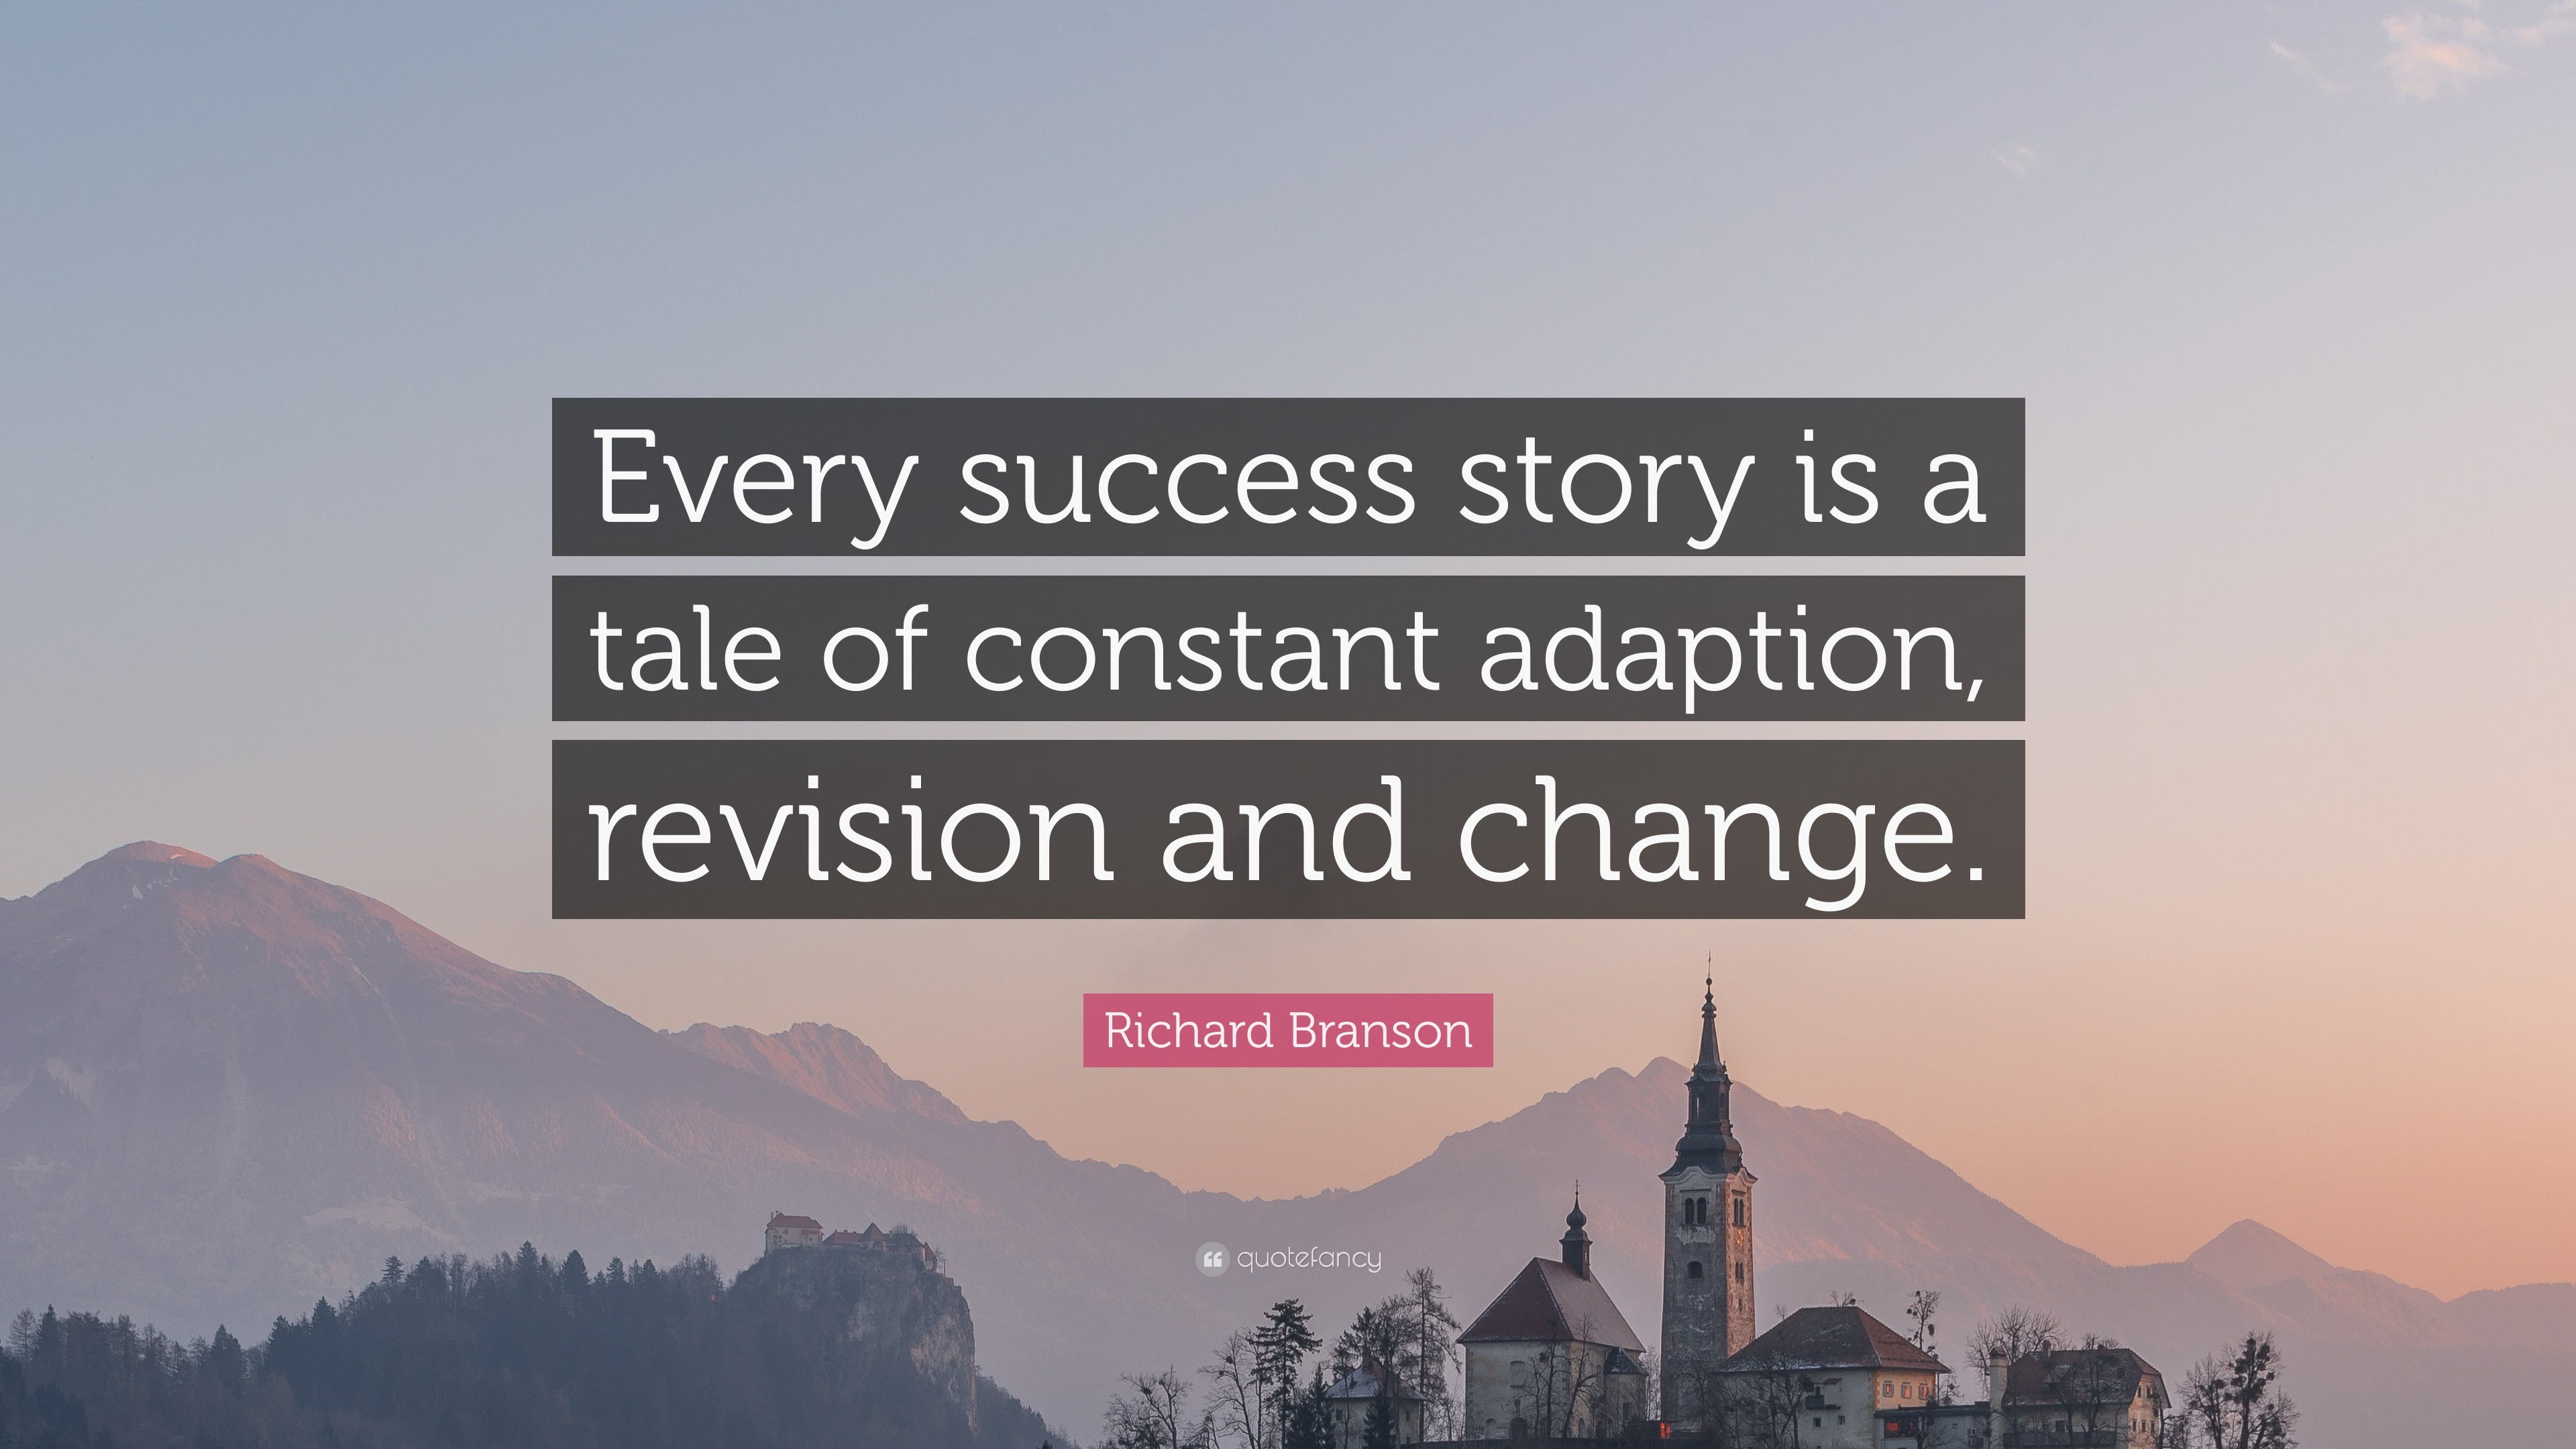 2374998 Richard Branson Quote Every success story is a tale of constant